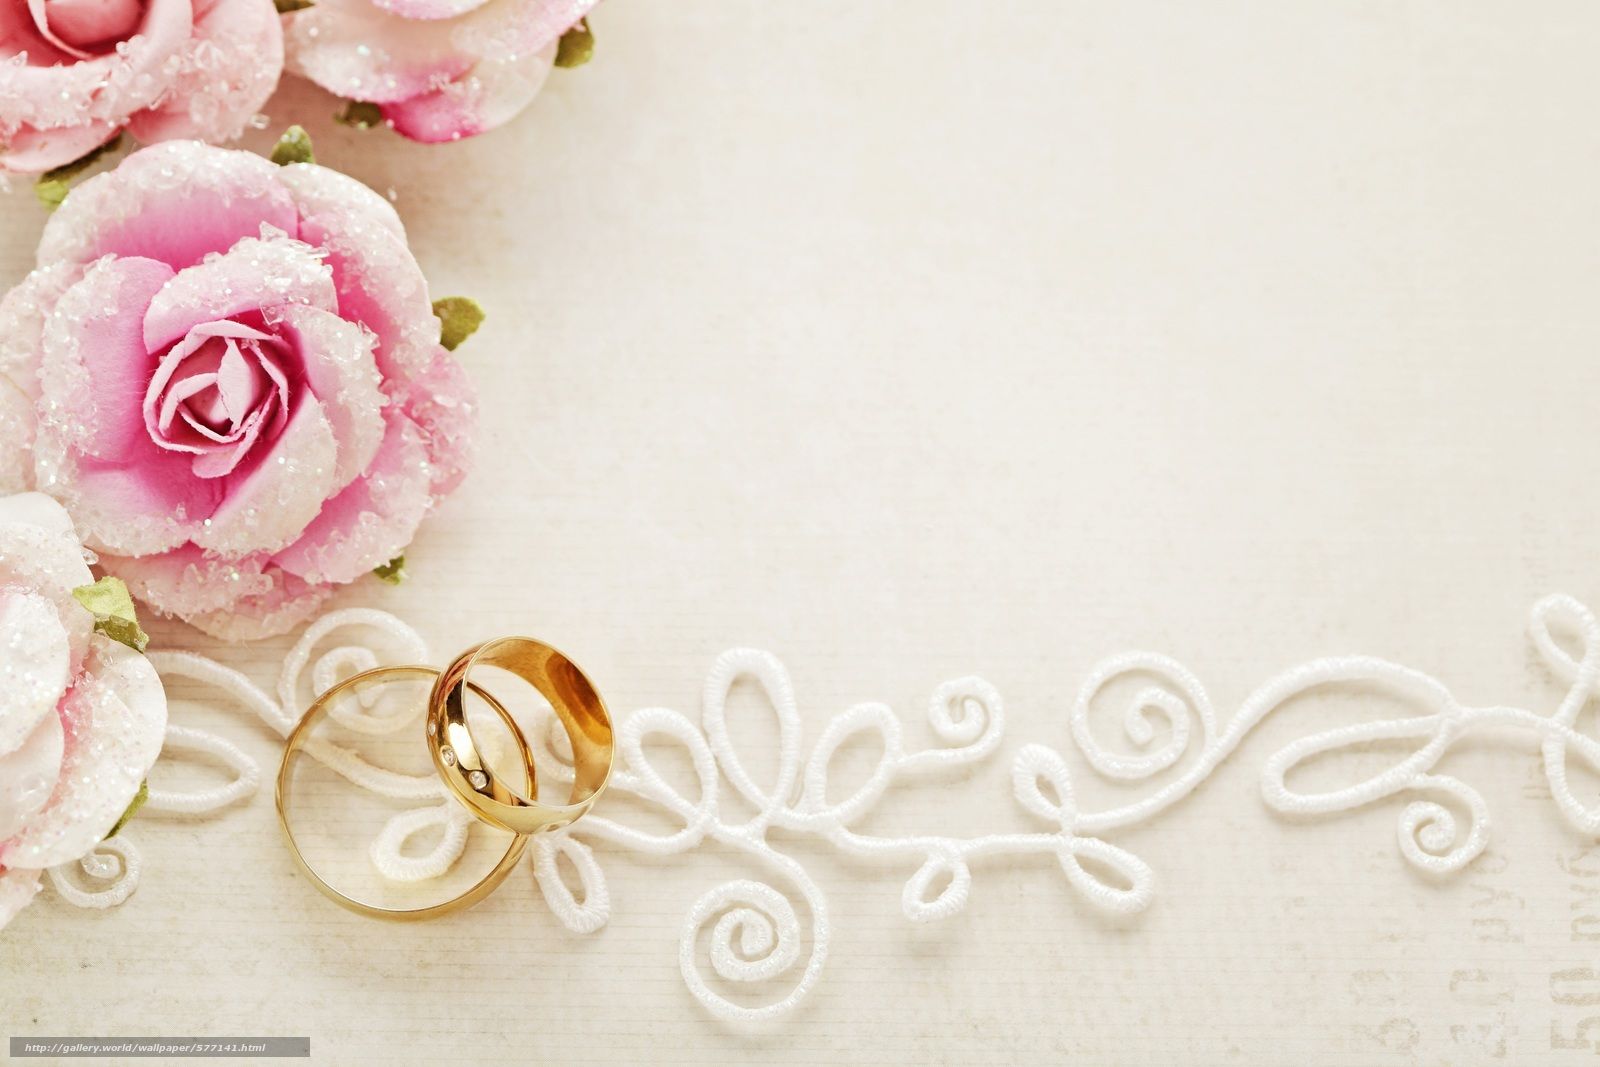 Two gold wedding rings on a white background - Wedding